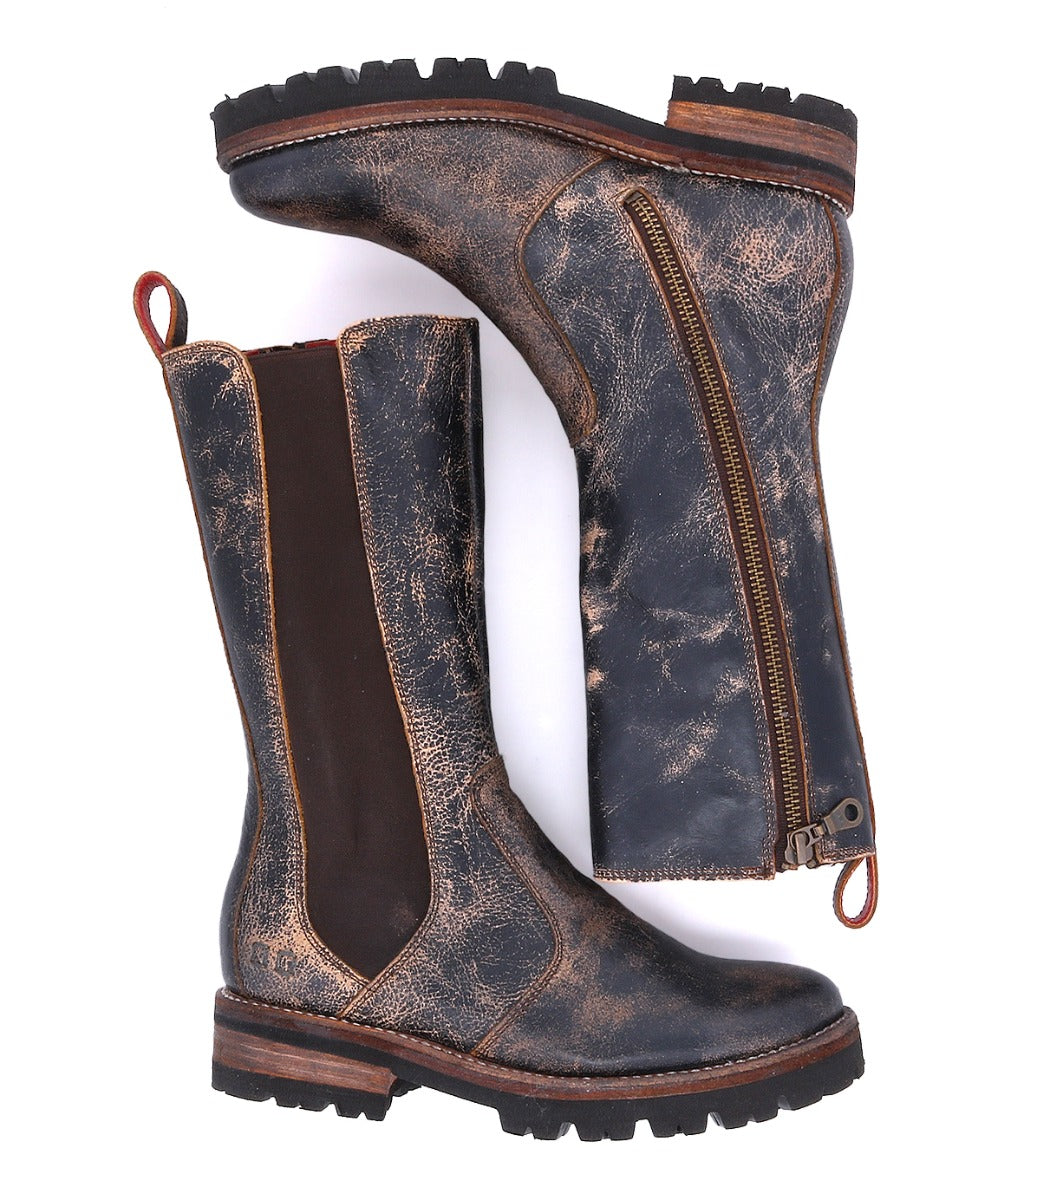 A pair of Kataleya brown leather boots with a zipper on the side by Bed Stu.